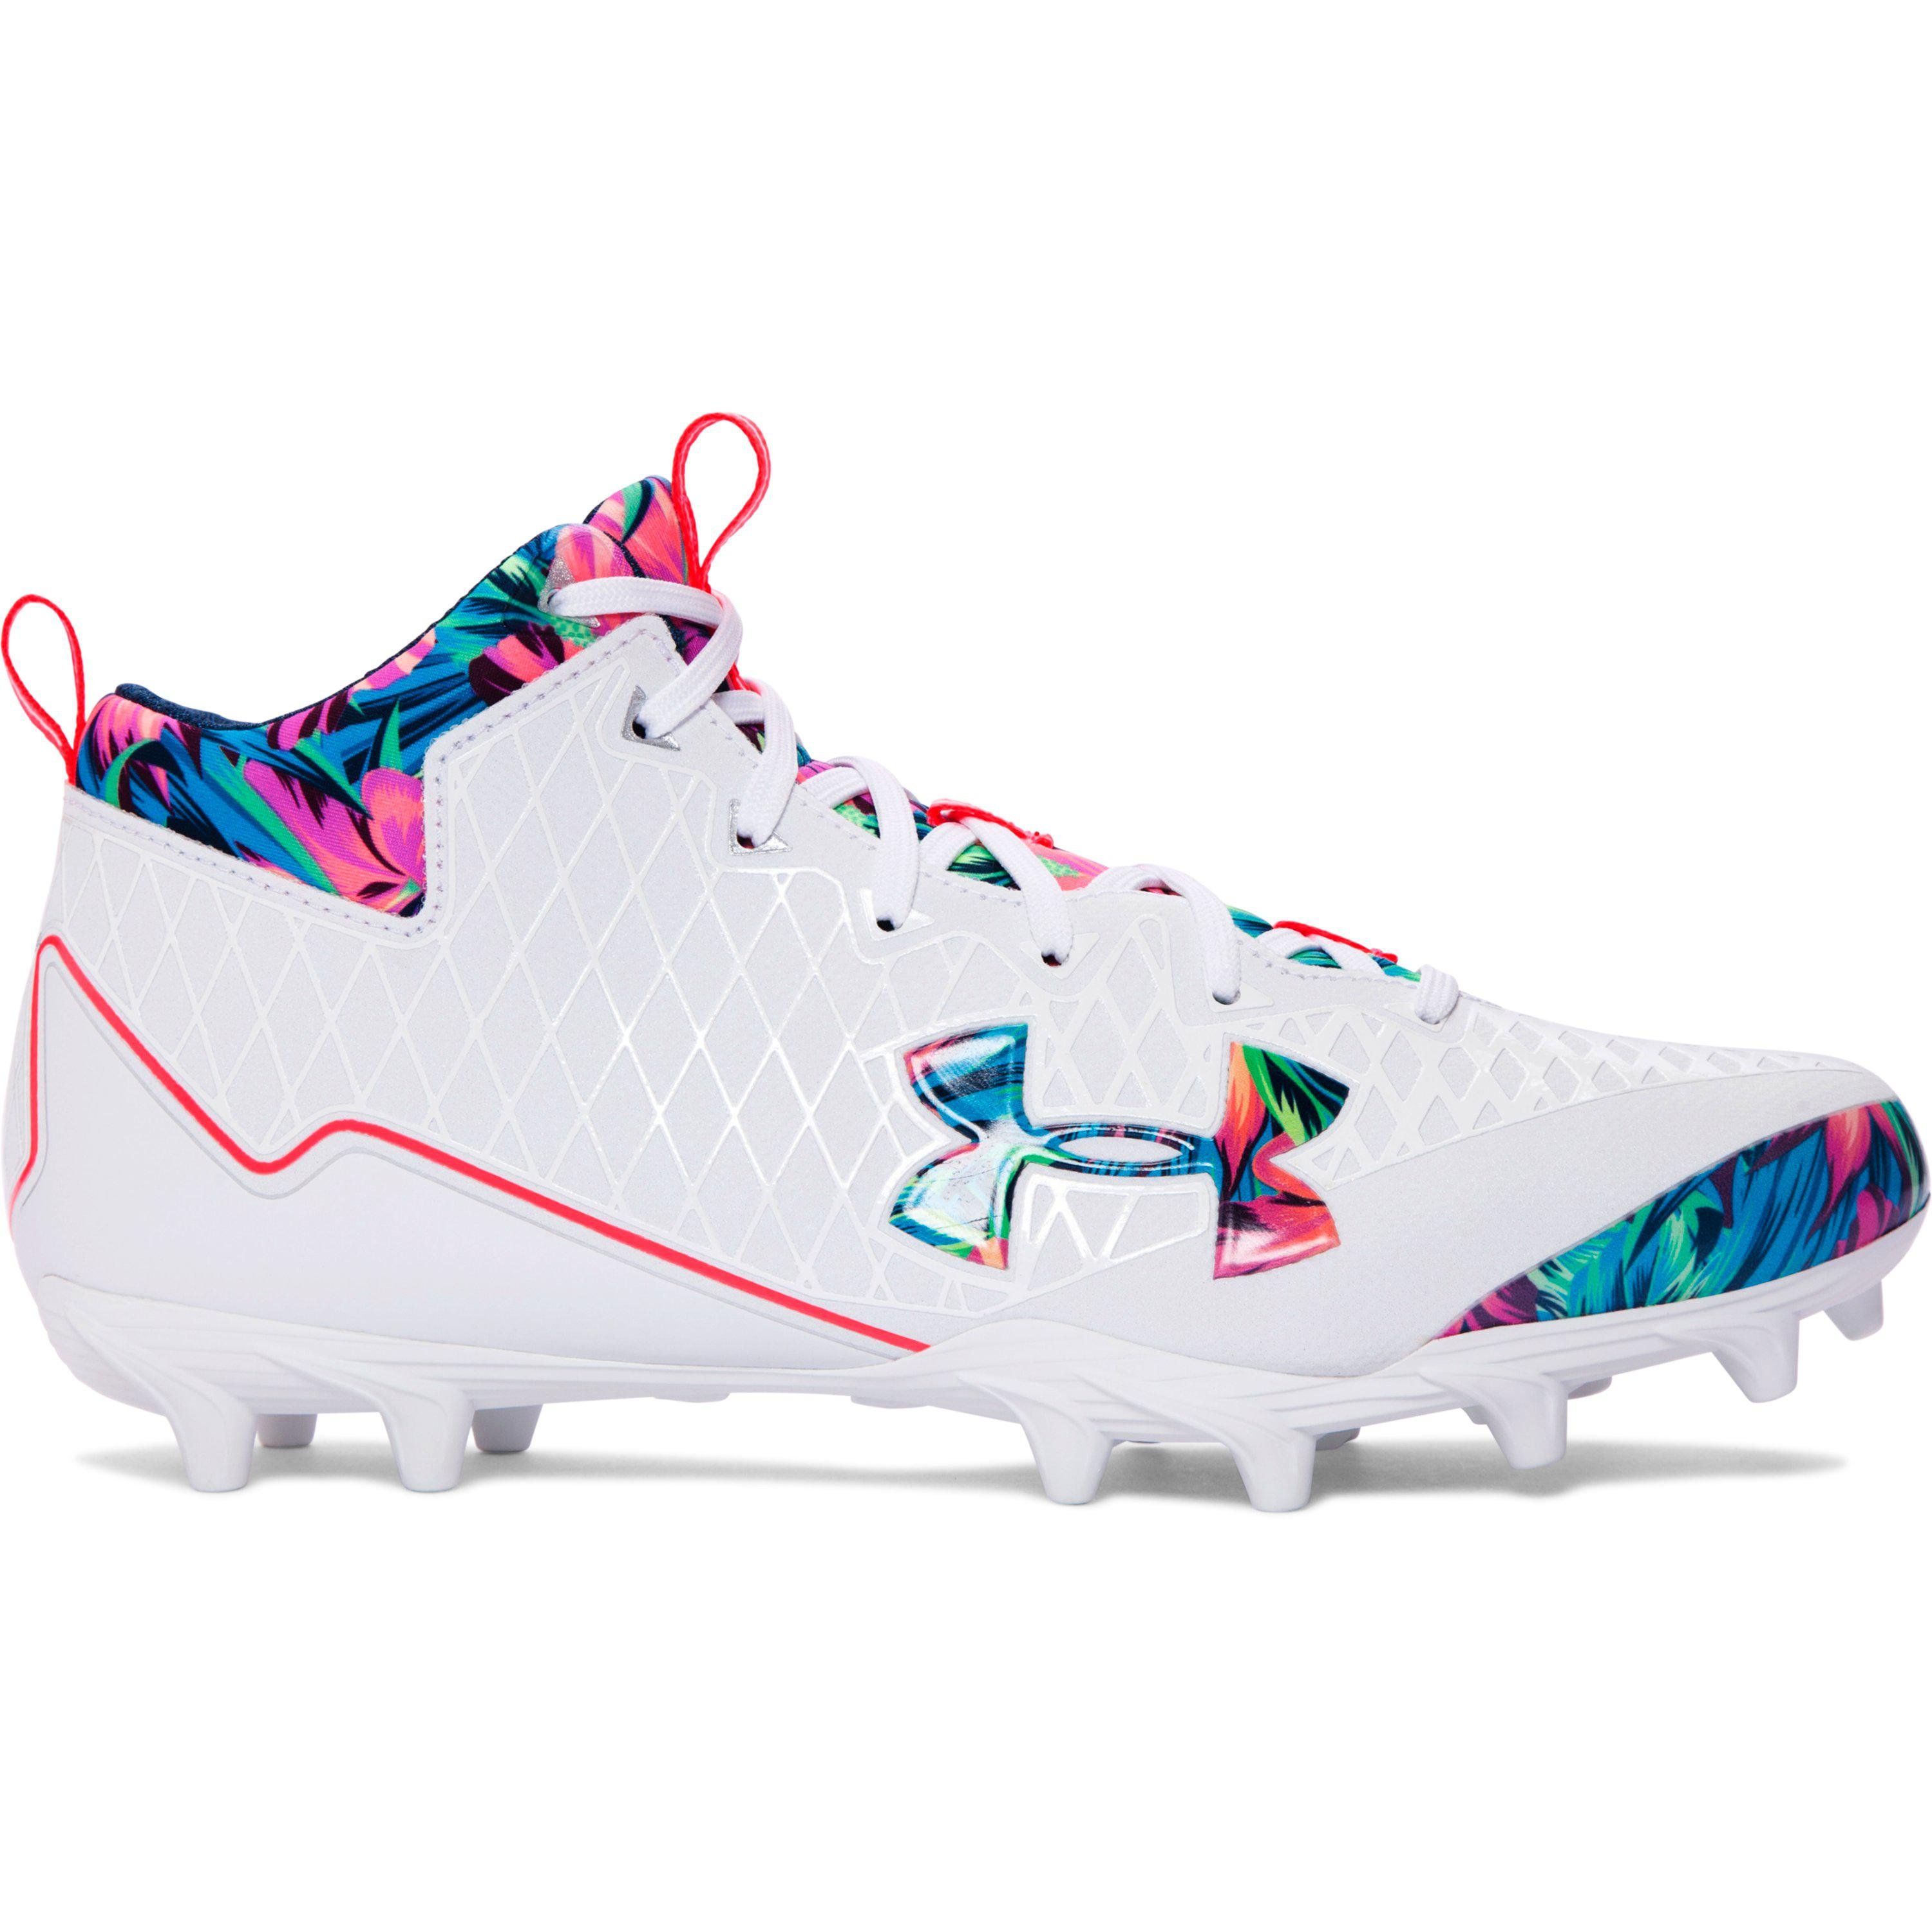 under armour lax cleats